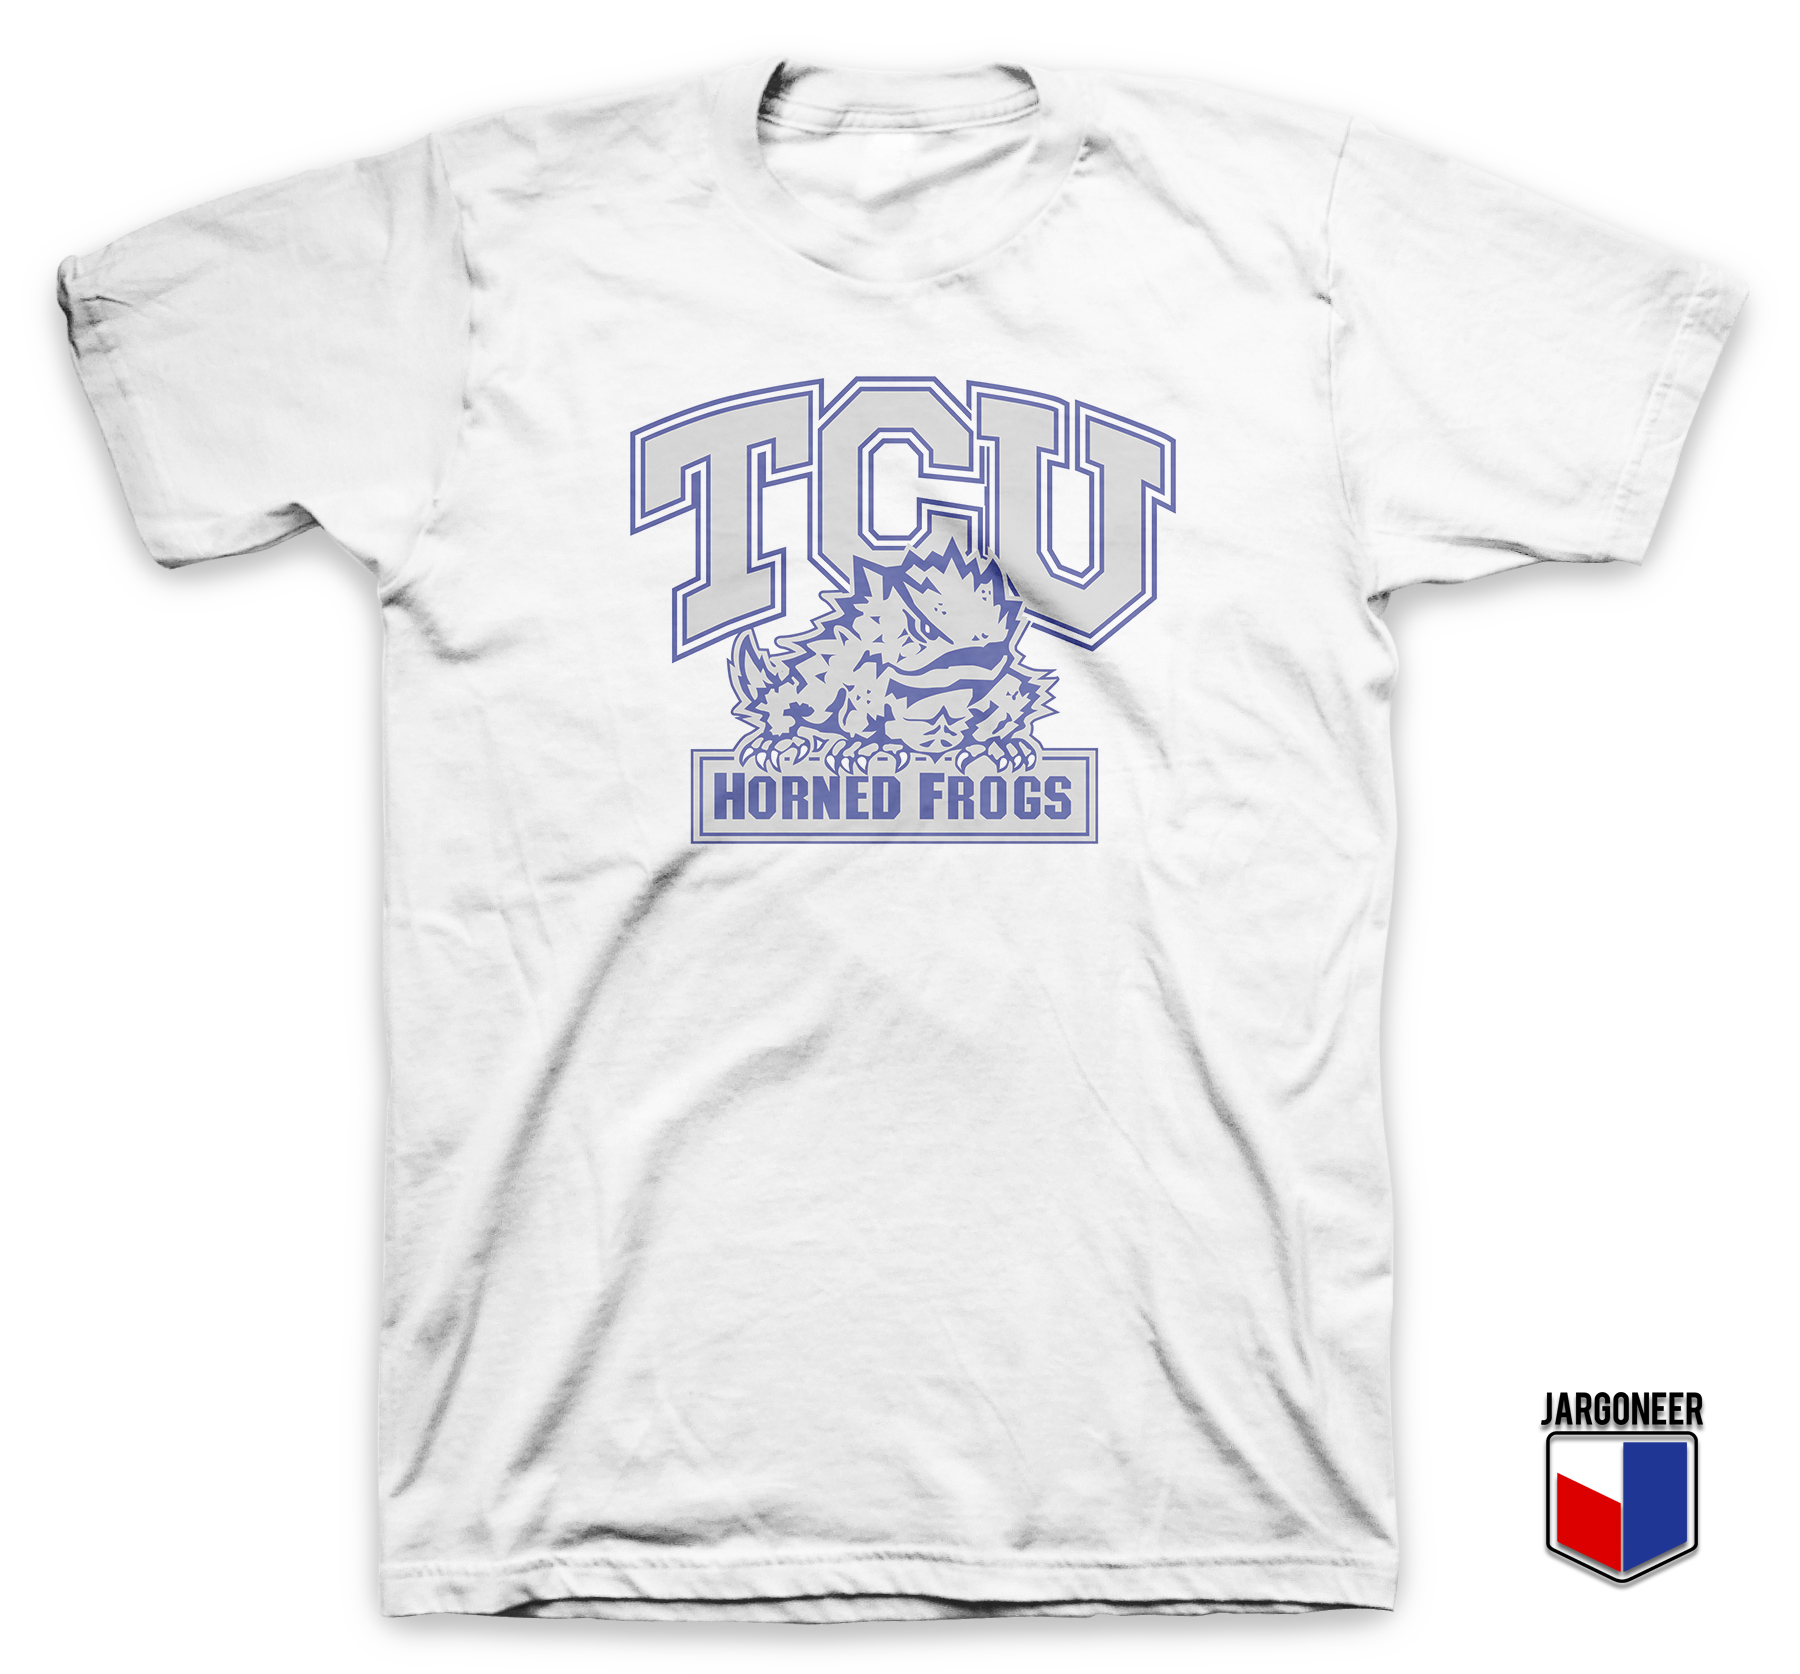 The Mighty Frog Of TCU White T Shirt - Shop Unique Graphic Cool Shirt Designs